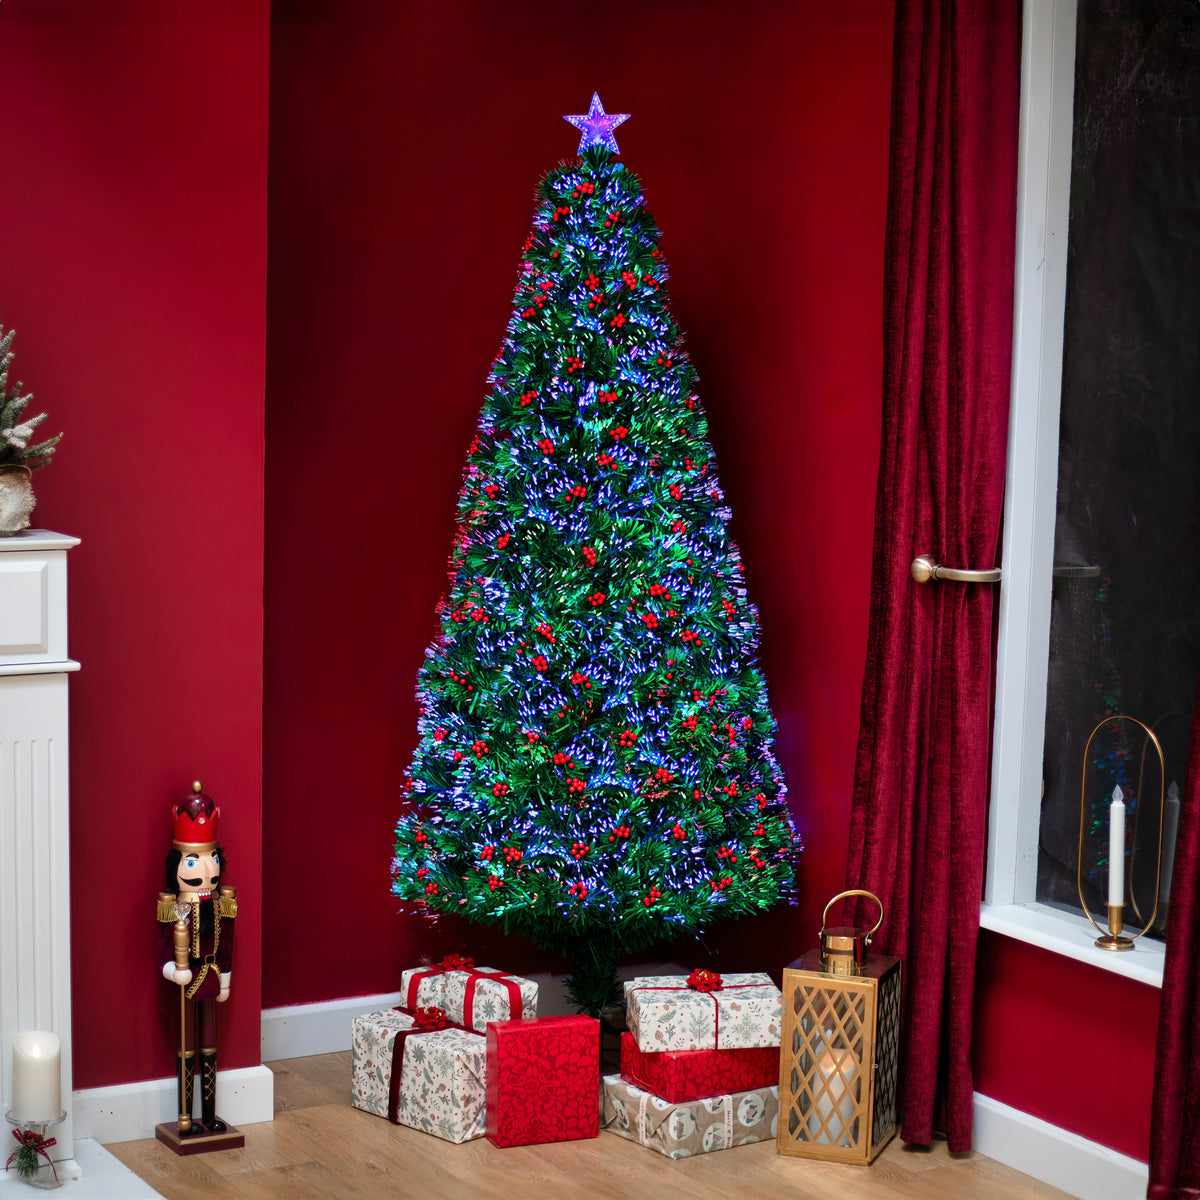 2ft - 6ft Green Fibre Optic Christmas Tree with Multi Coloured Fibre Optic Lights and Red Berries